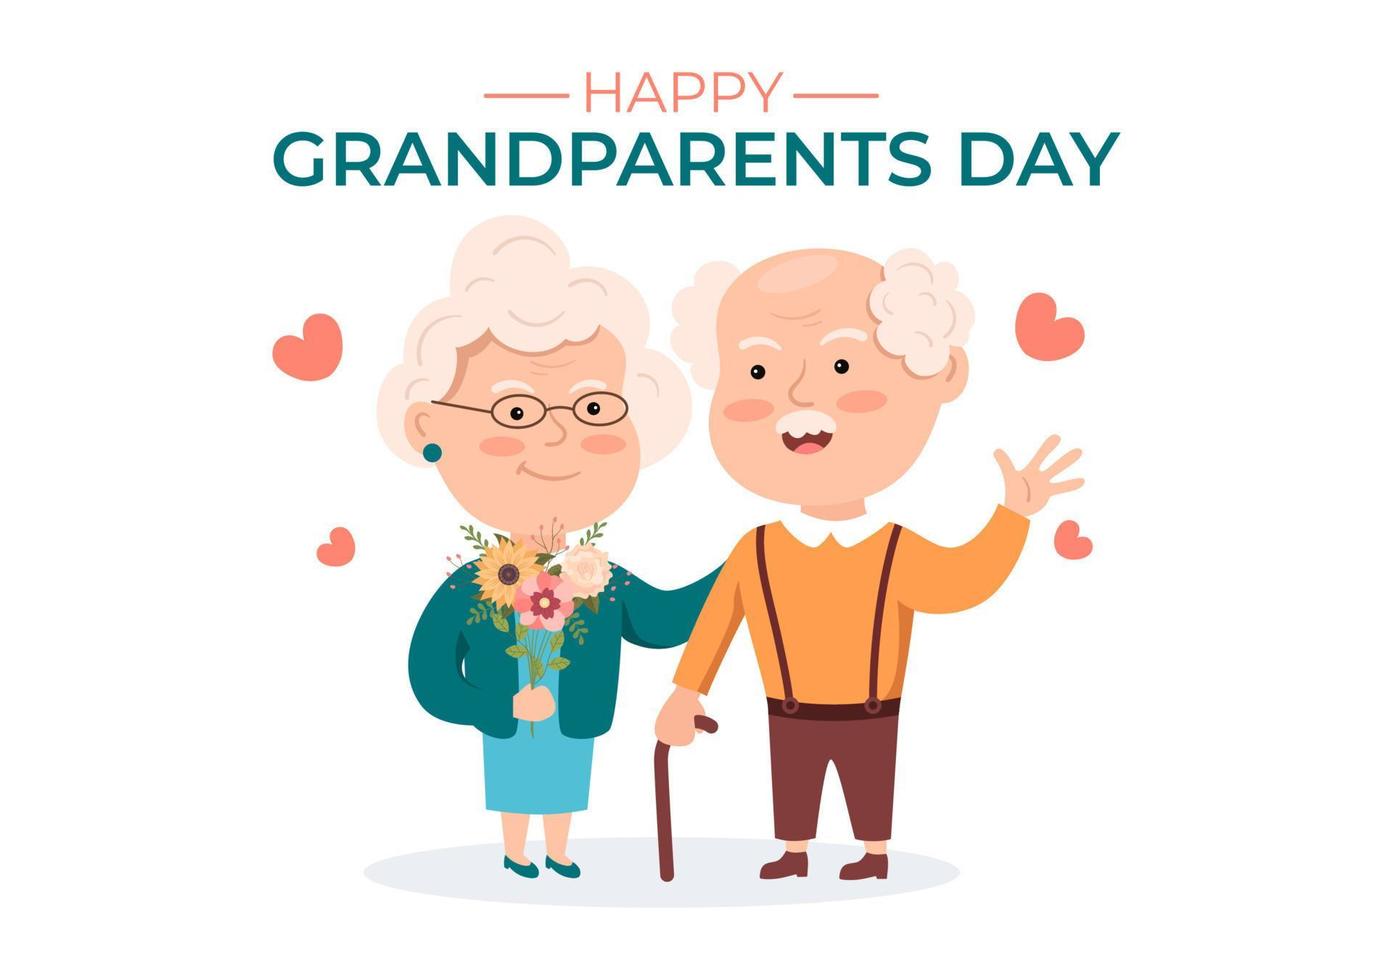 Happy Grandparents Day Cute Cartoon Illustration with Older Couple, Flower Decoration, Grandpa and Grandma in Flat Style for Poster or Greeting Card vector